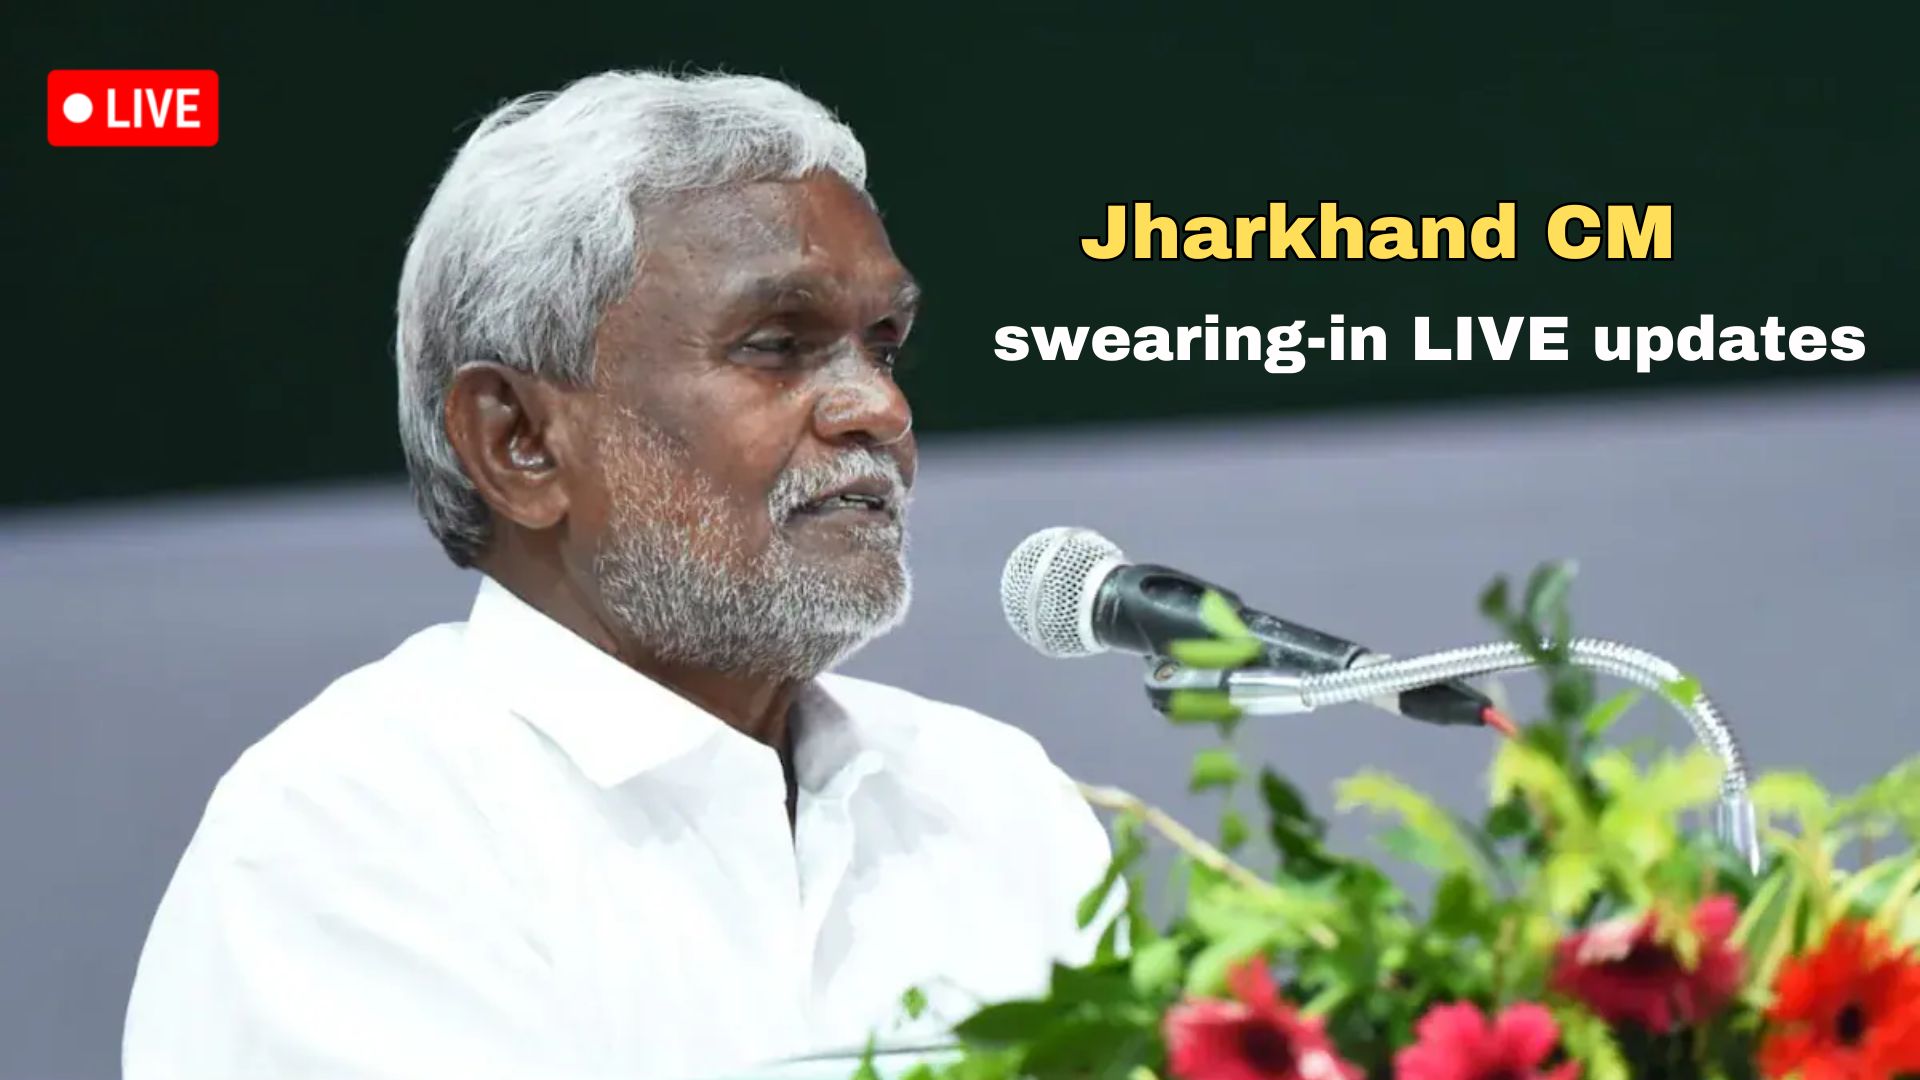 Jharkhand CM swearing-in LIVE updates: Champai Soren takes oath as the new chief minister